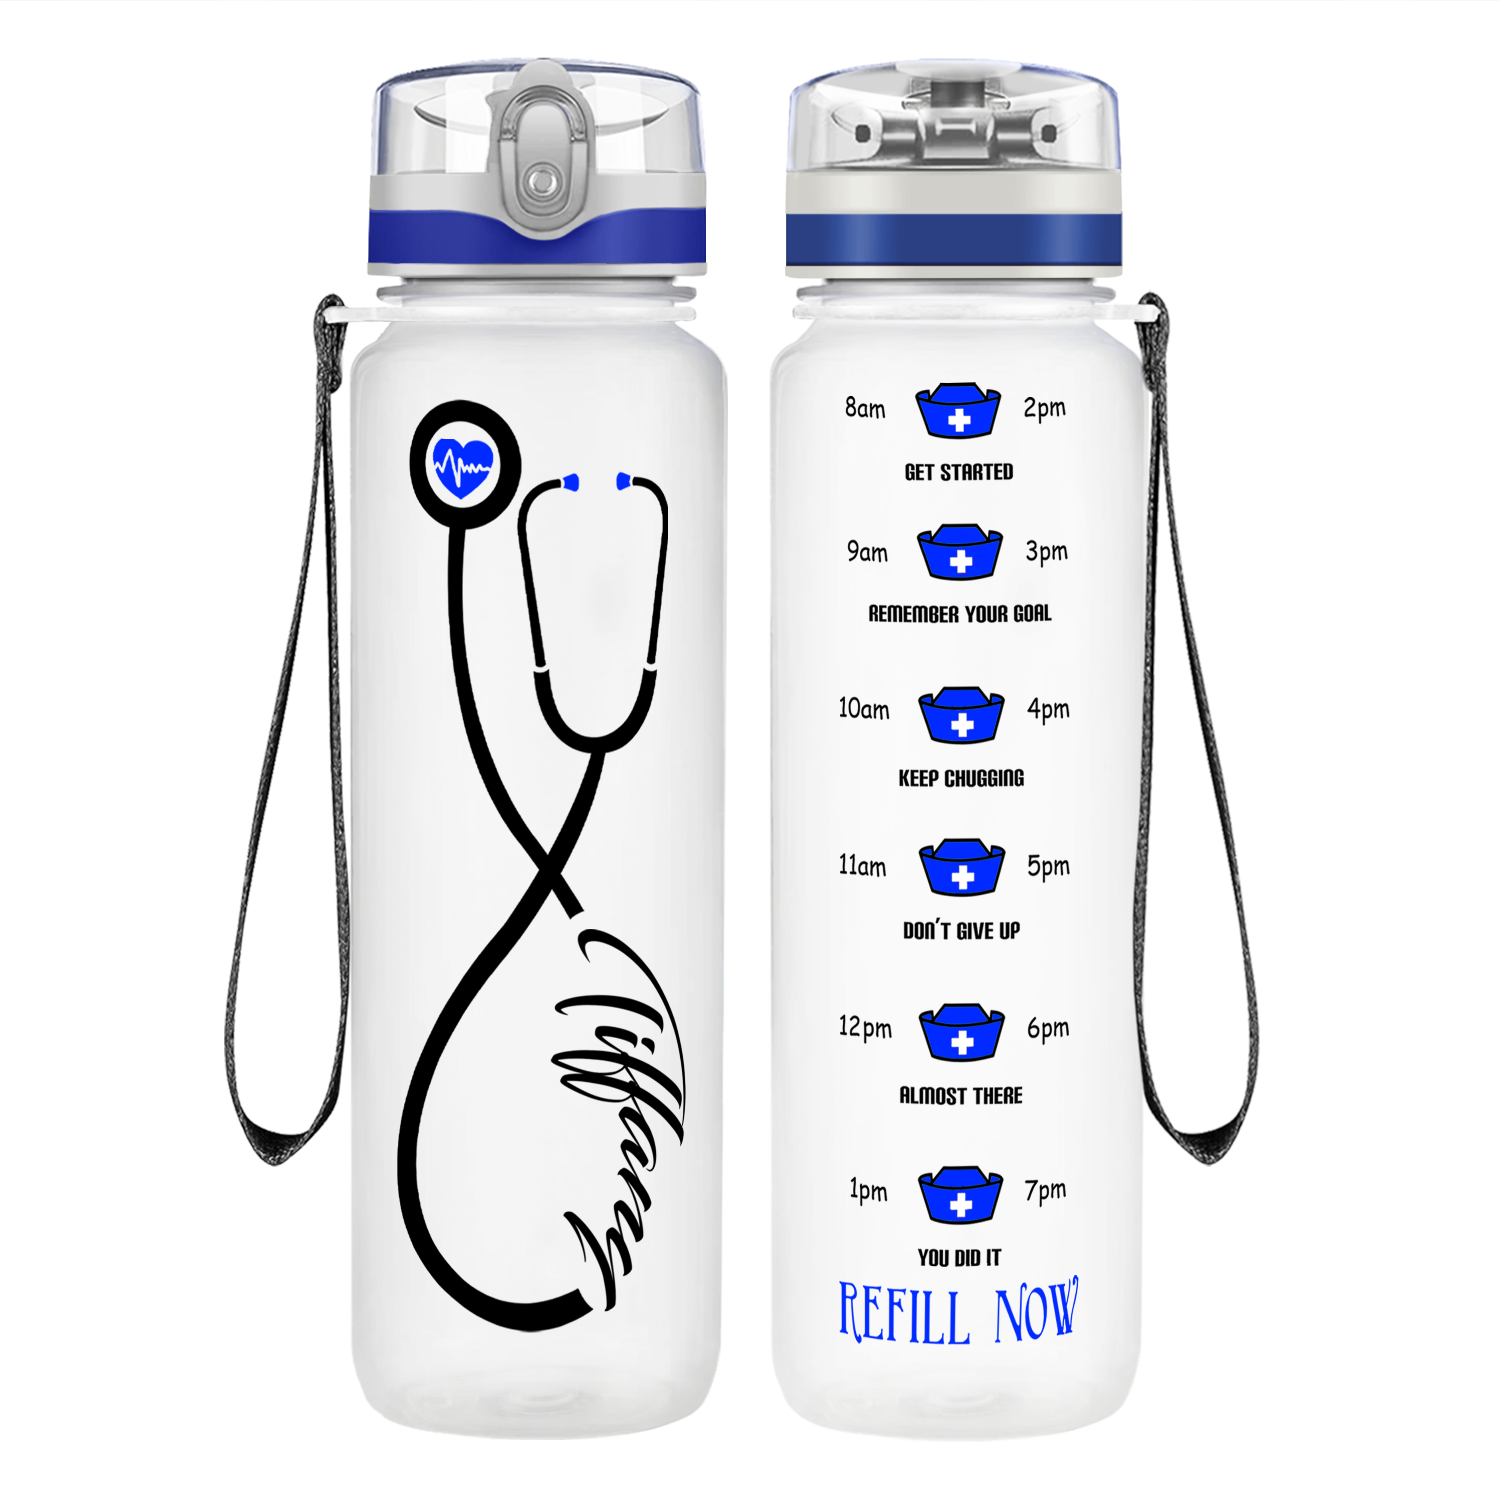 Personalized Stethoscope Nurse on 32oz Motivational Tracking Water Bot -  Cuptify